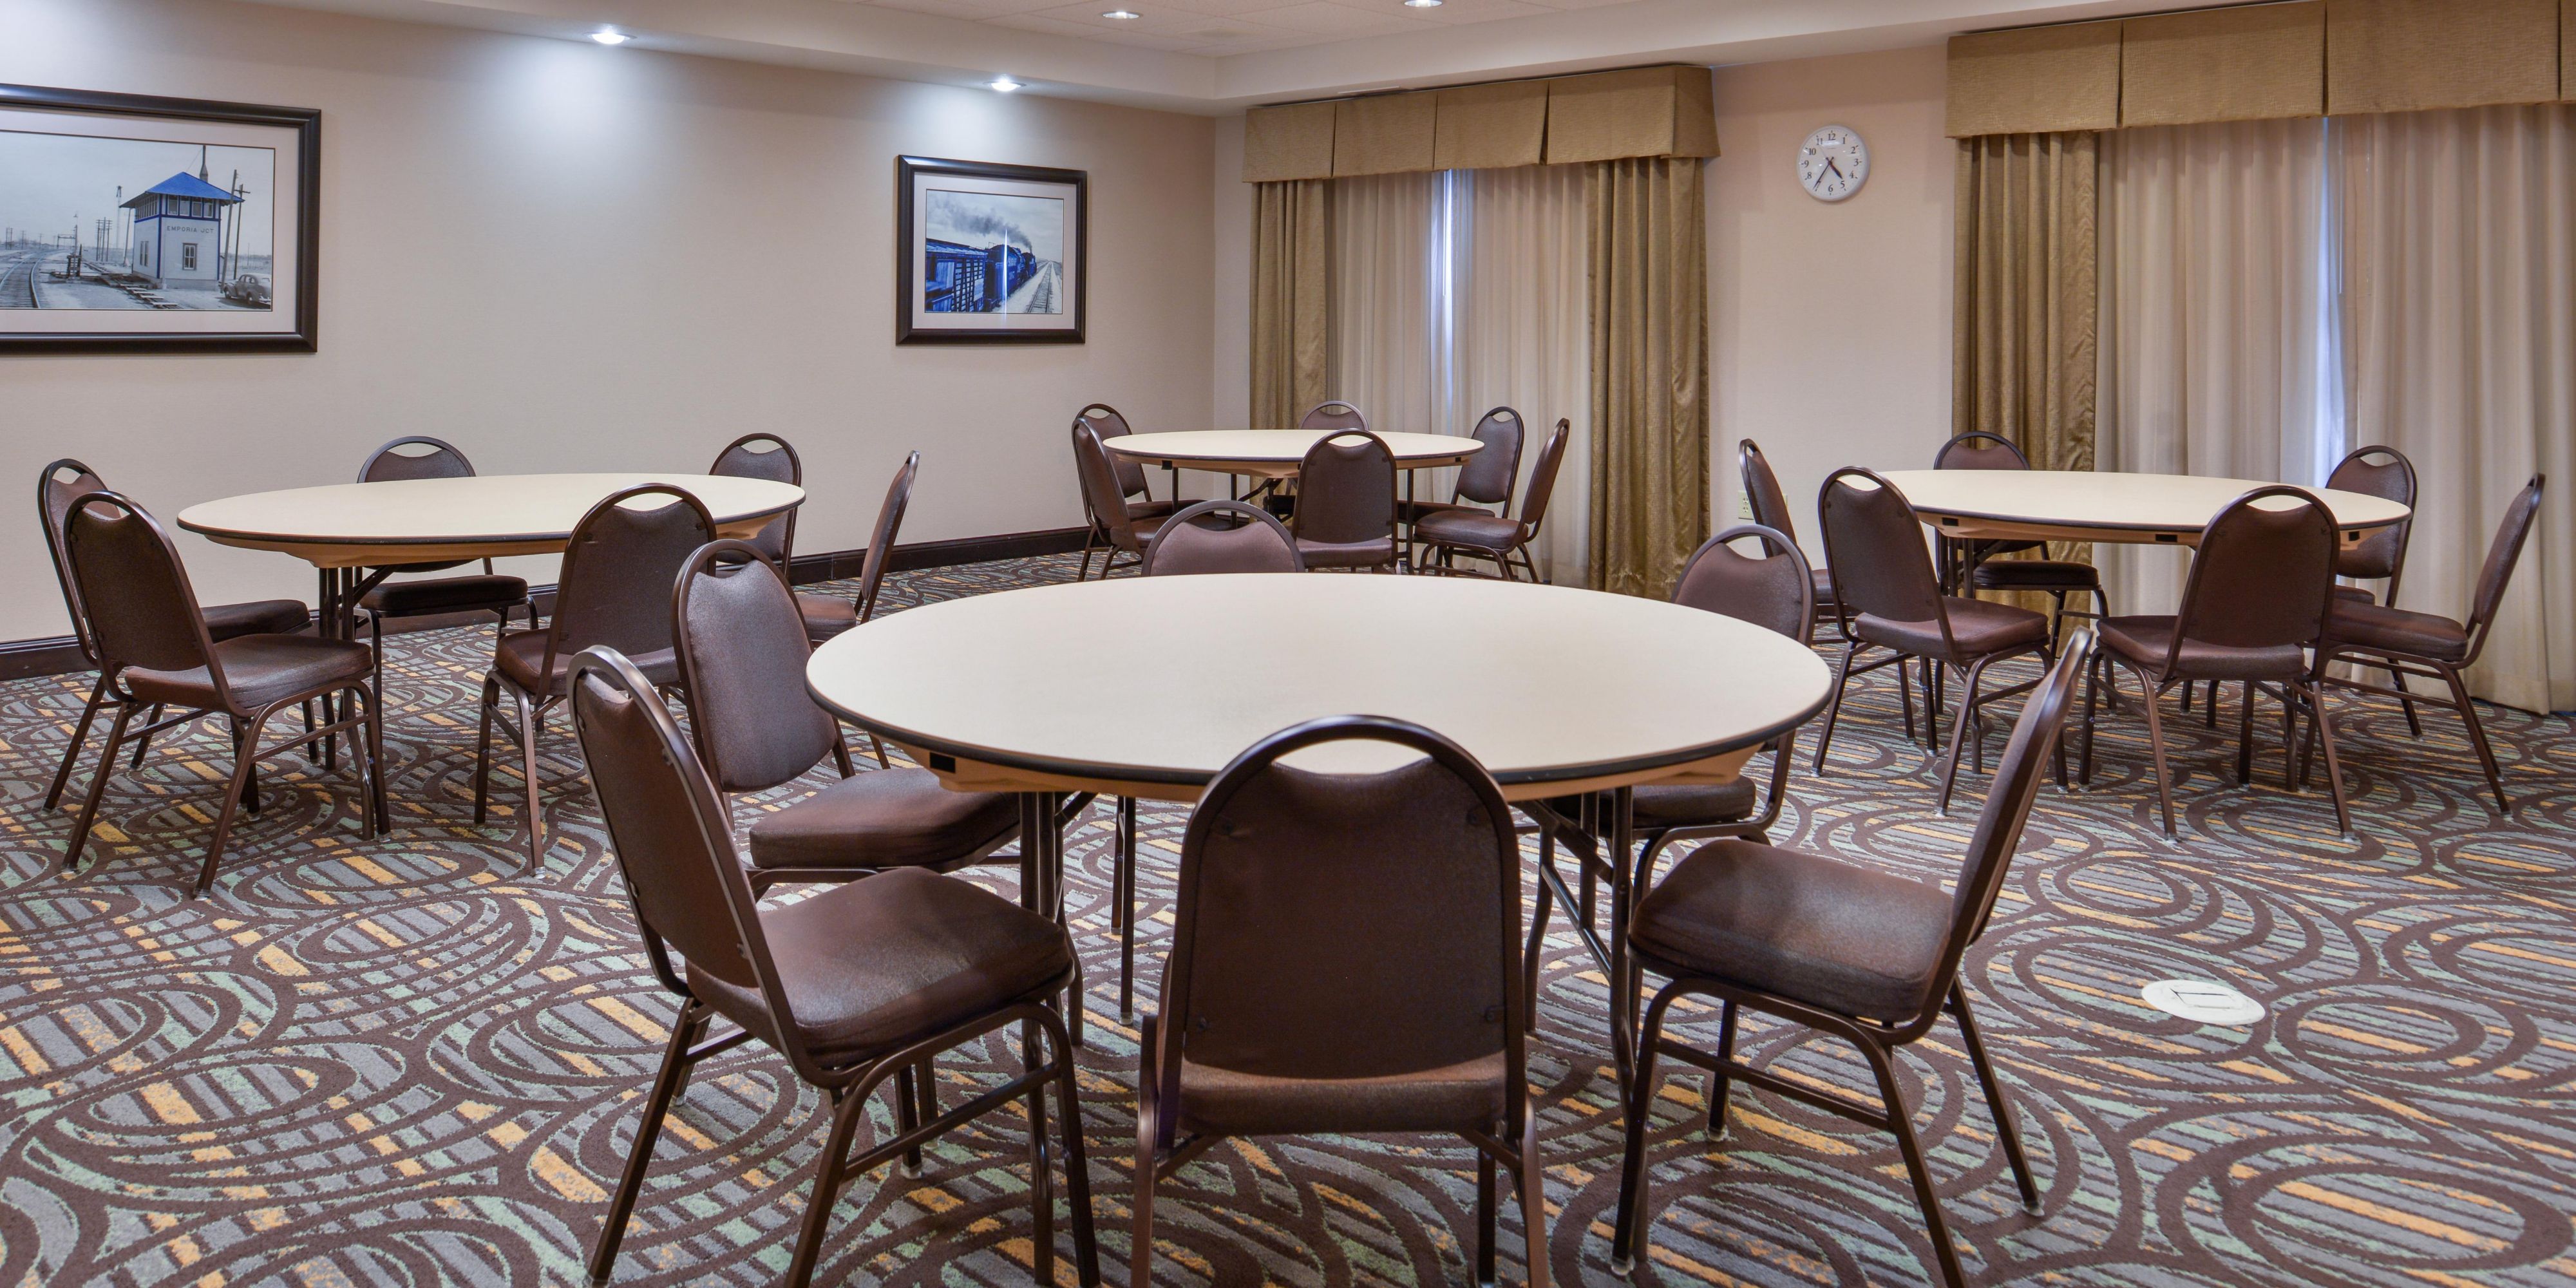 Host a formal business meeting or a unique special occasion in our versatile meeting space. Our hotel offers 575 sq. ft. of space, catering options, and event planning experts. Contact our Sales Office for your next event.